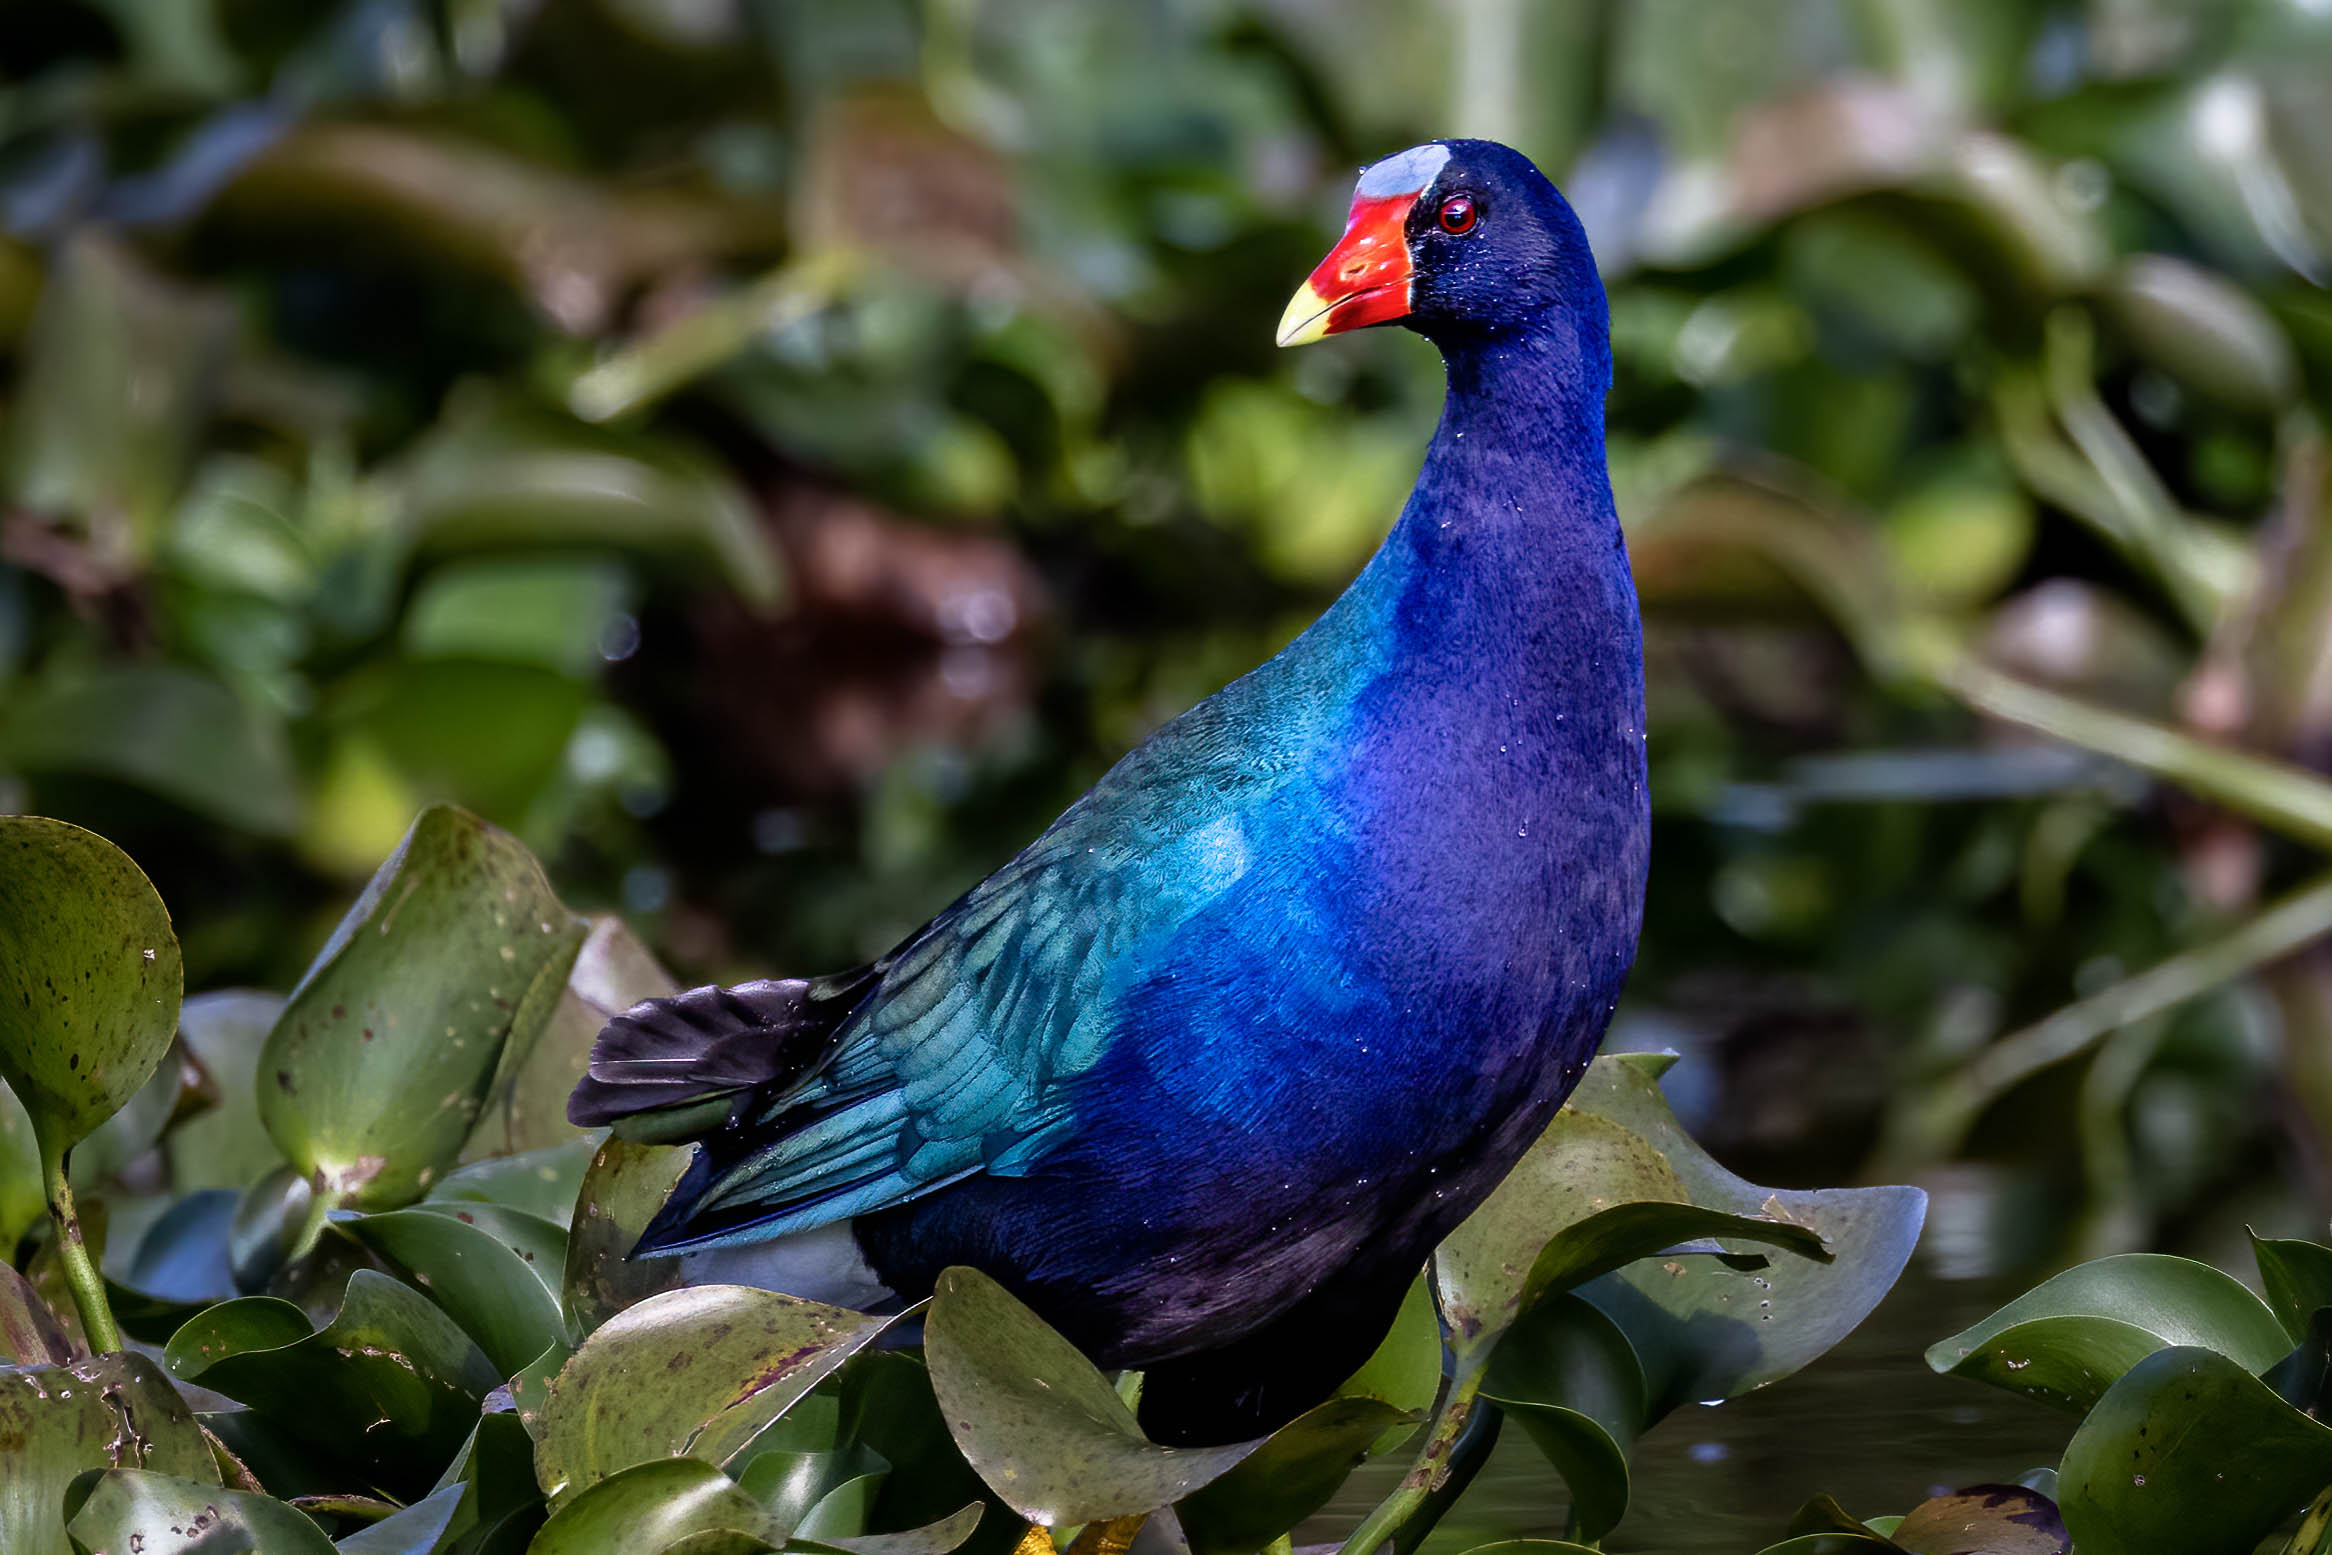 A shiny blue bird perched in greenery.